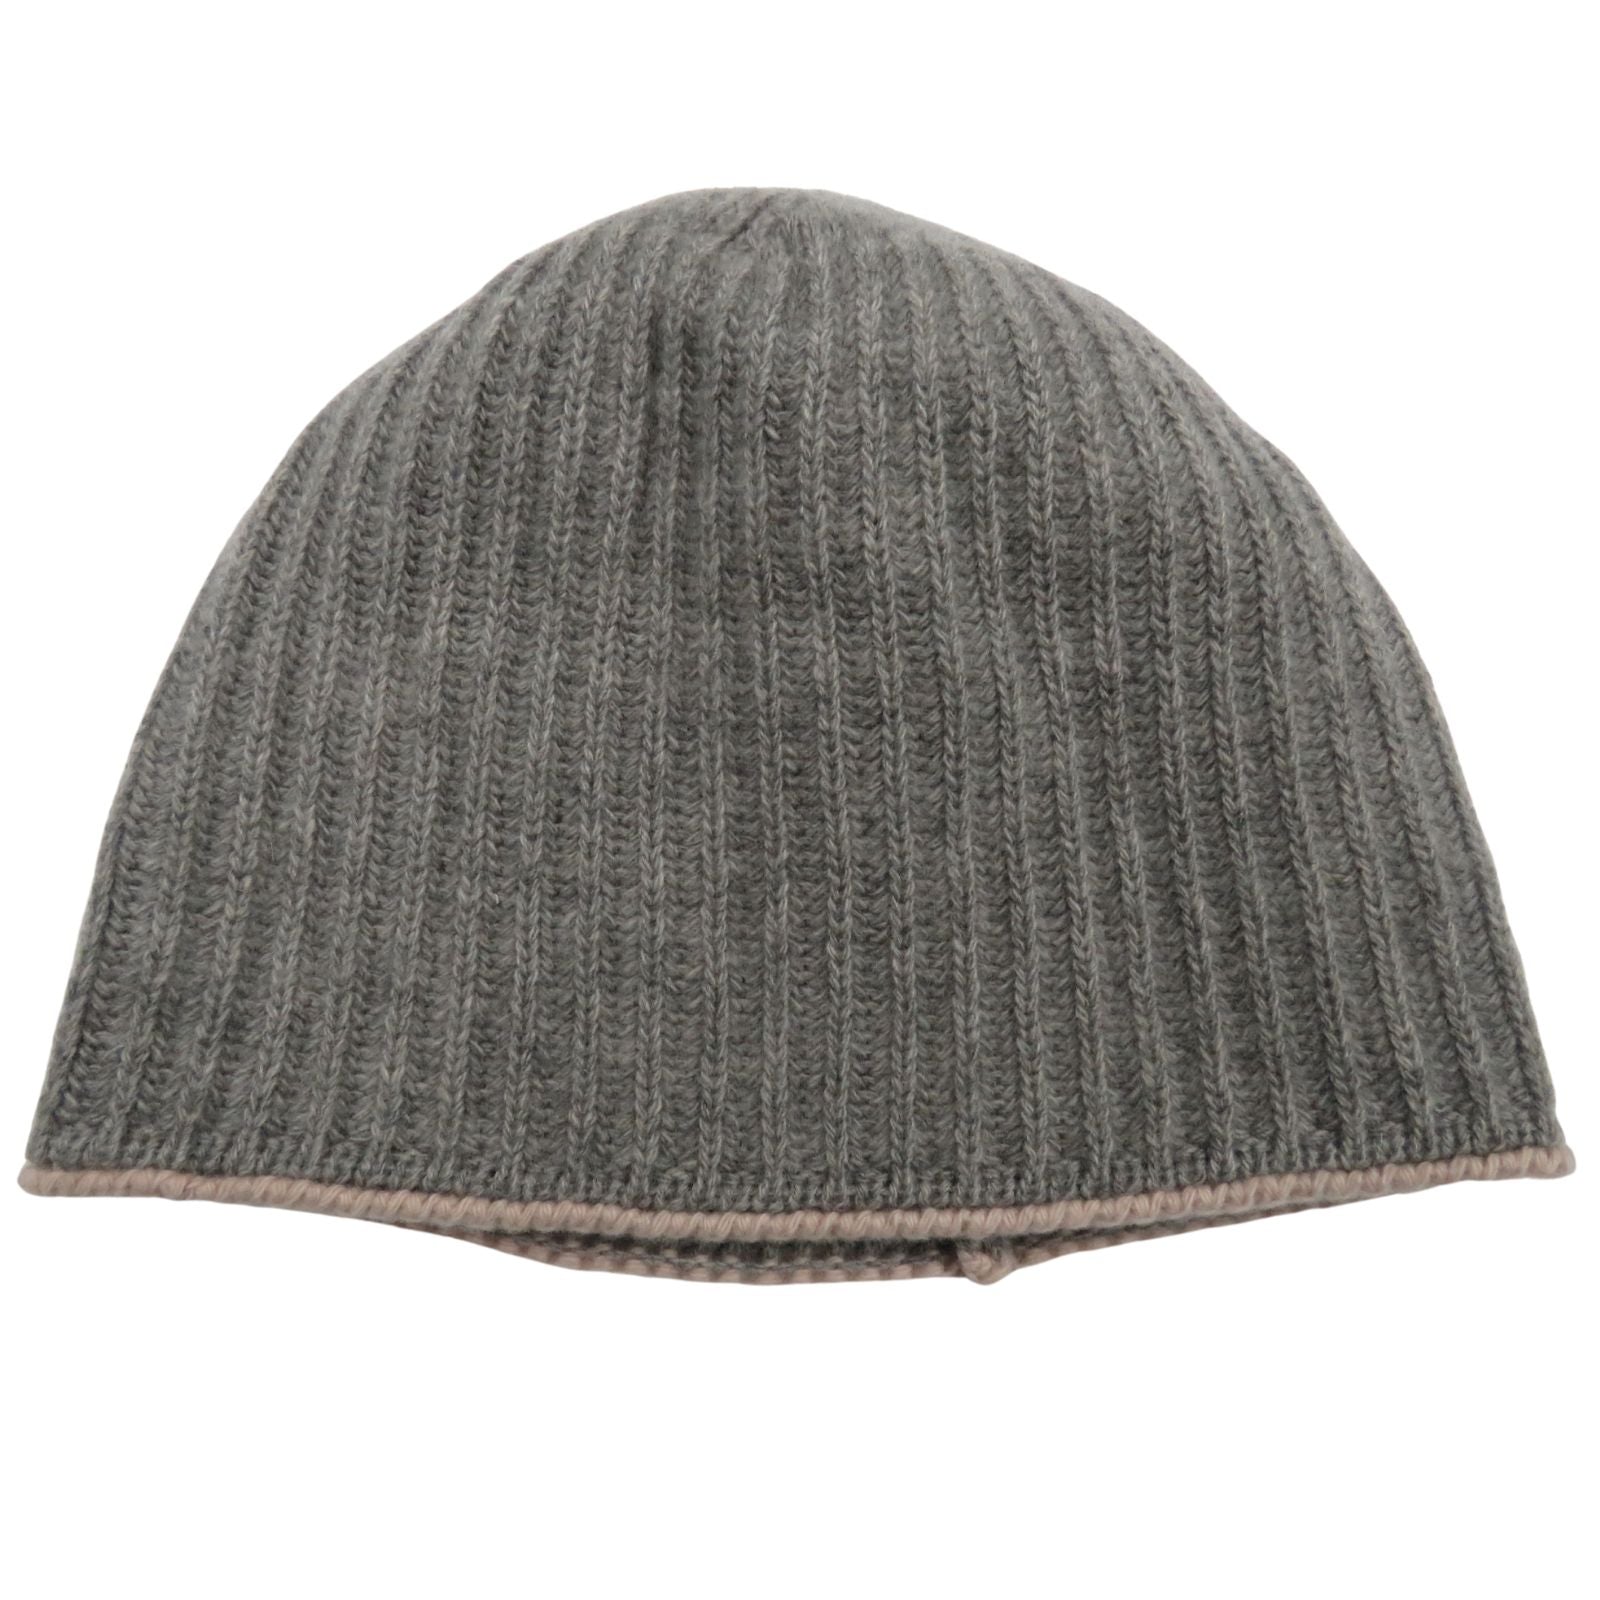 Beanie Hat With Contrasting Piping